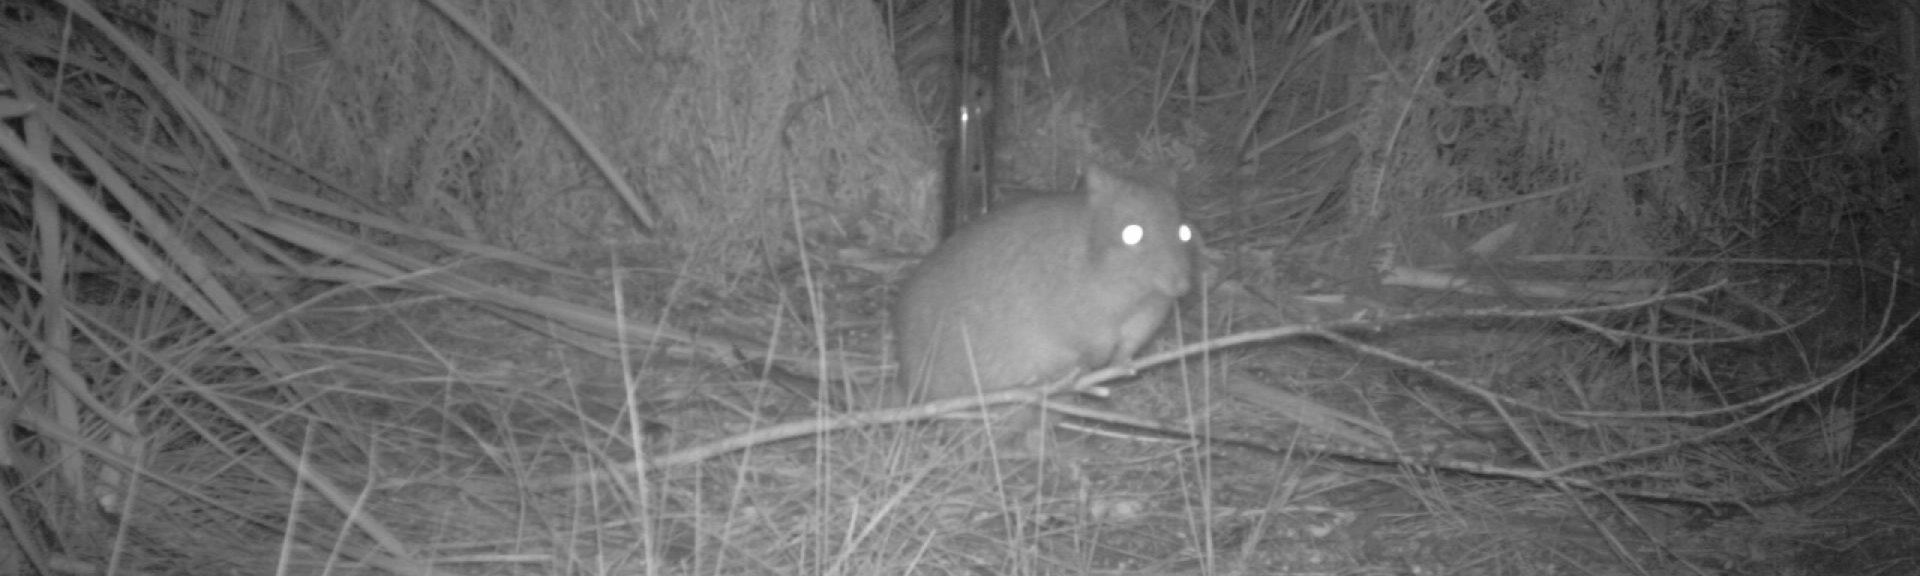 Camera trap photo of “Notchy” the Long-nosed potoroo in Feb 2020